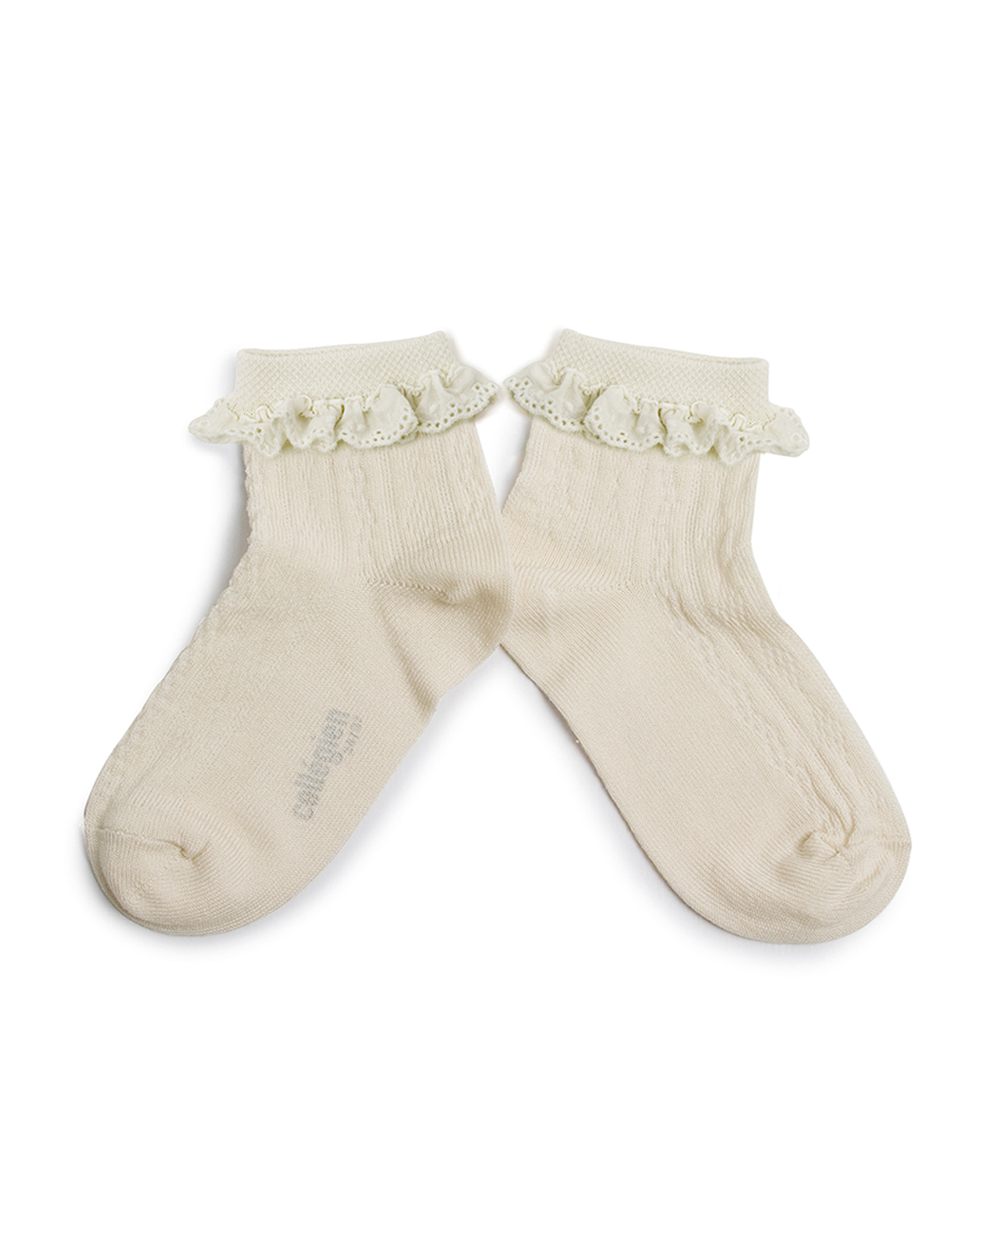 [Collégien] Marie-Antoinette - Lightweight Pointelle Socks with Broderie Anglaise - Doux Agneaux [21-23, 32-35]